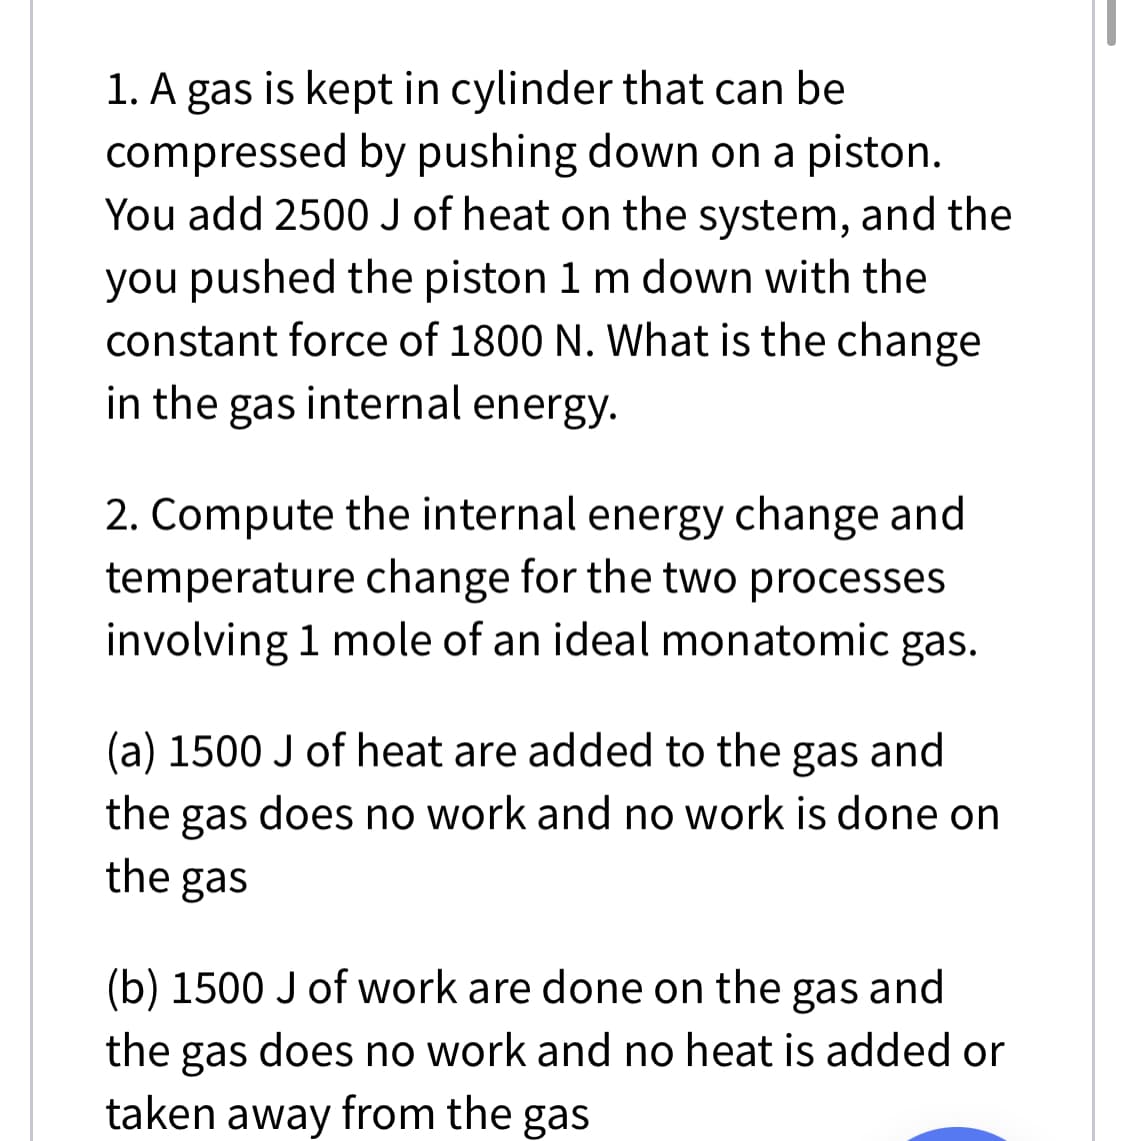 1. A gas is kept in cylinder that can be
compressed by pushing down on a piston.
You add 2500 J of heat on the system, and the
you pushed the piston 1 m down with the
constant force of 1800 N. What is the change
in the gas internal energy.
2. Compute the internal energy change and
temperature change for the two processes
involving 1 mole of an ideal monatomic gas.
(a) 1500 J of heat are added to the gas and
the gas does no work and no work is done on
the gas
(b) 1500 J of work are done on the gas and
the gas does no work and no heat is added or
taken away from the gas
